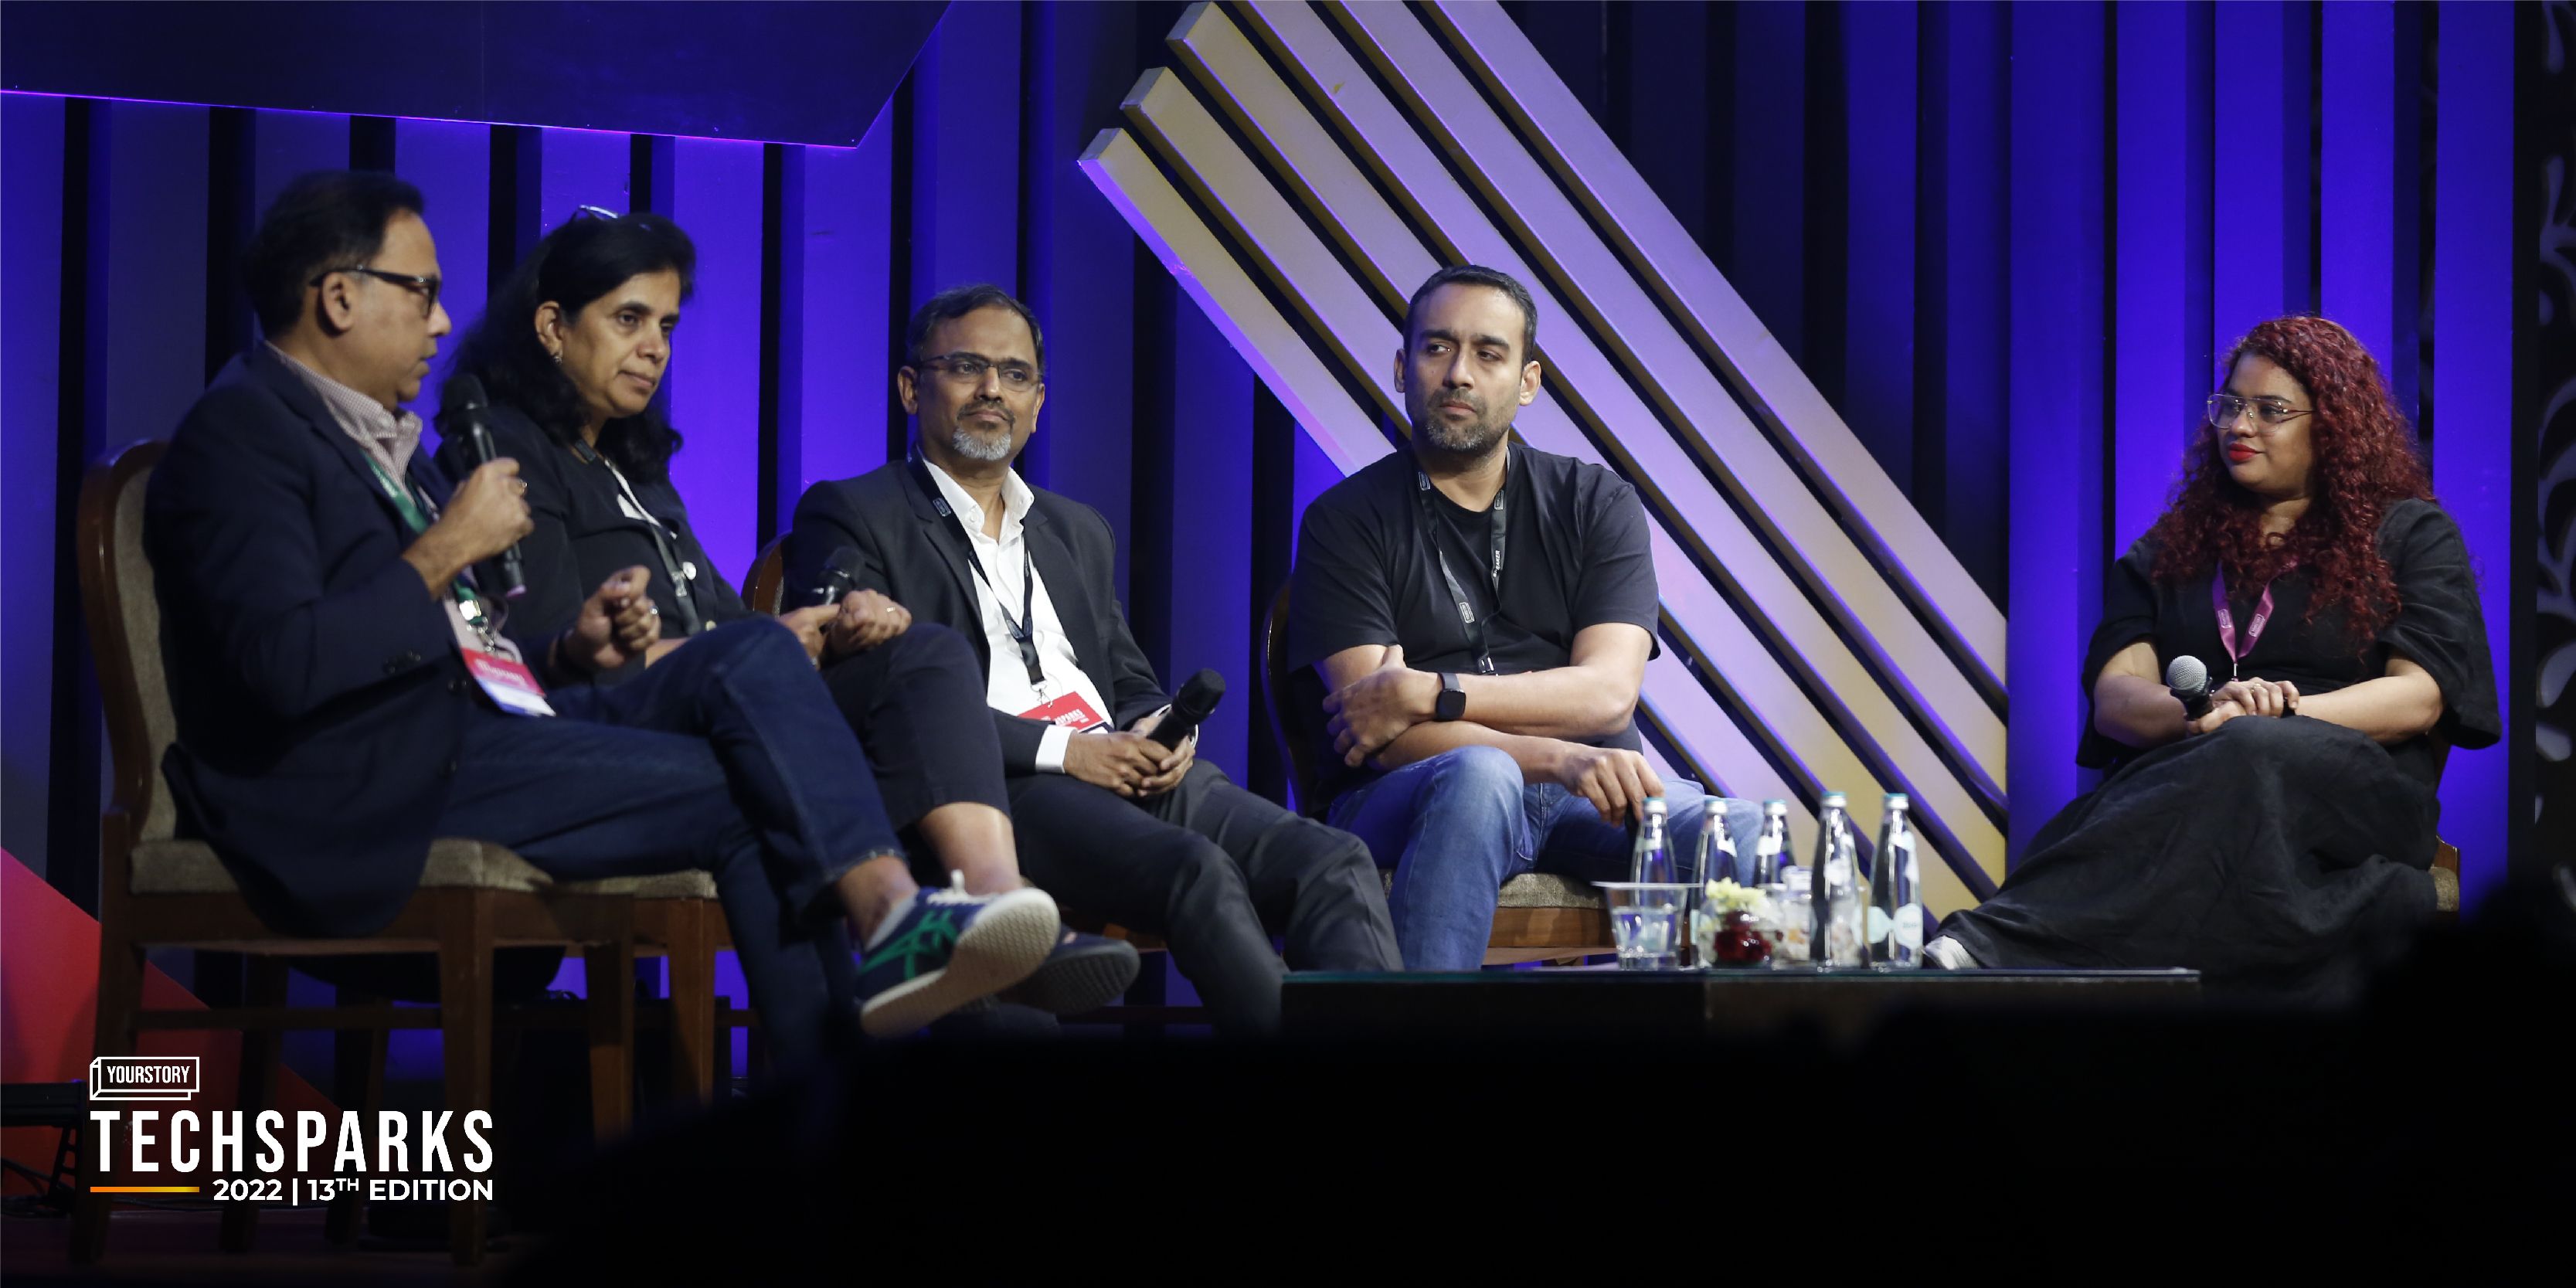 Startups with strong business models will attract funding, VCs say at TechSparks 2022

